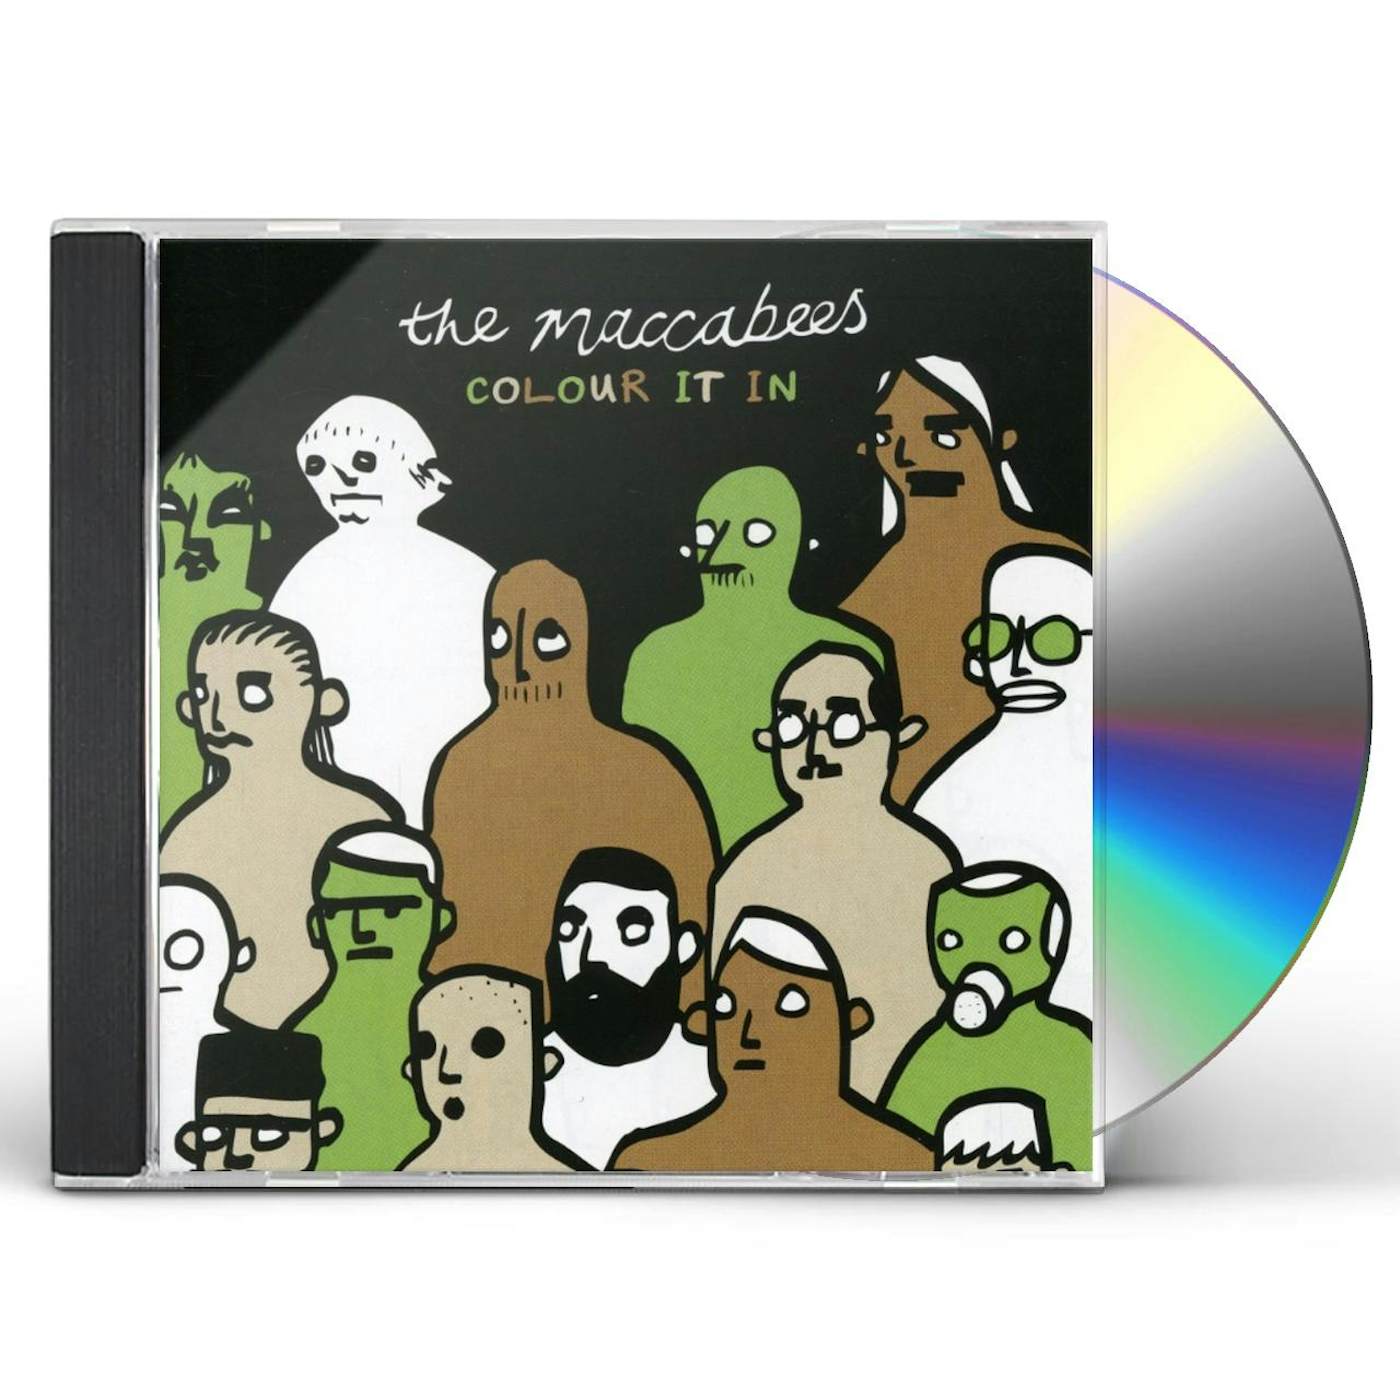 Maccabees COLOUR IT IN CD